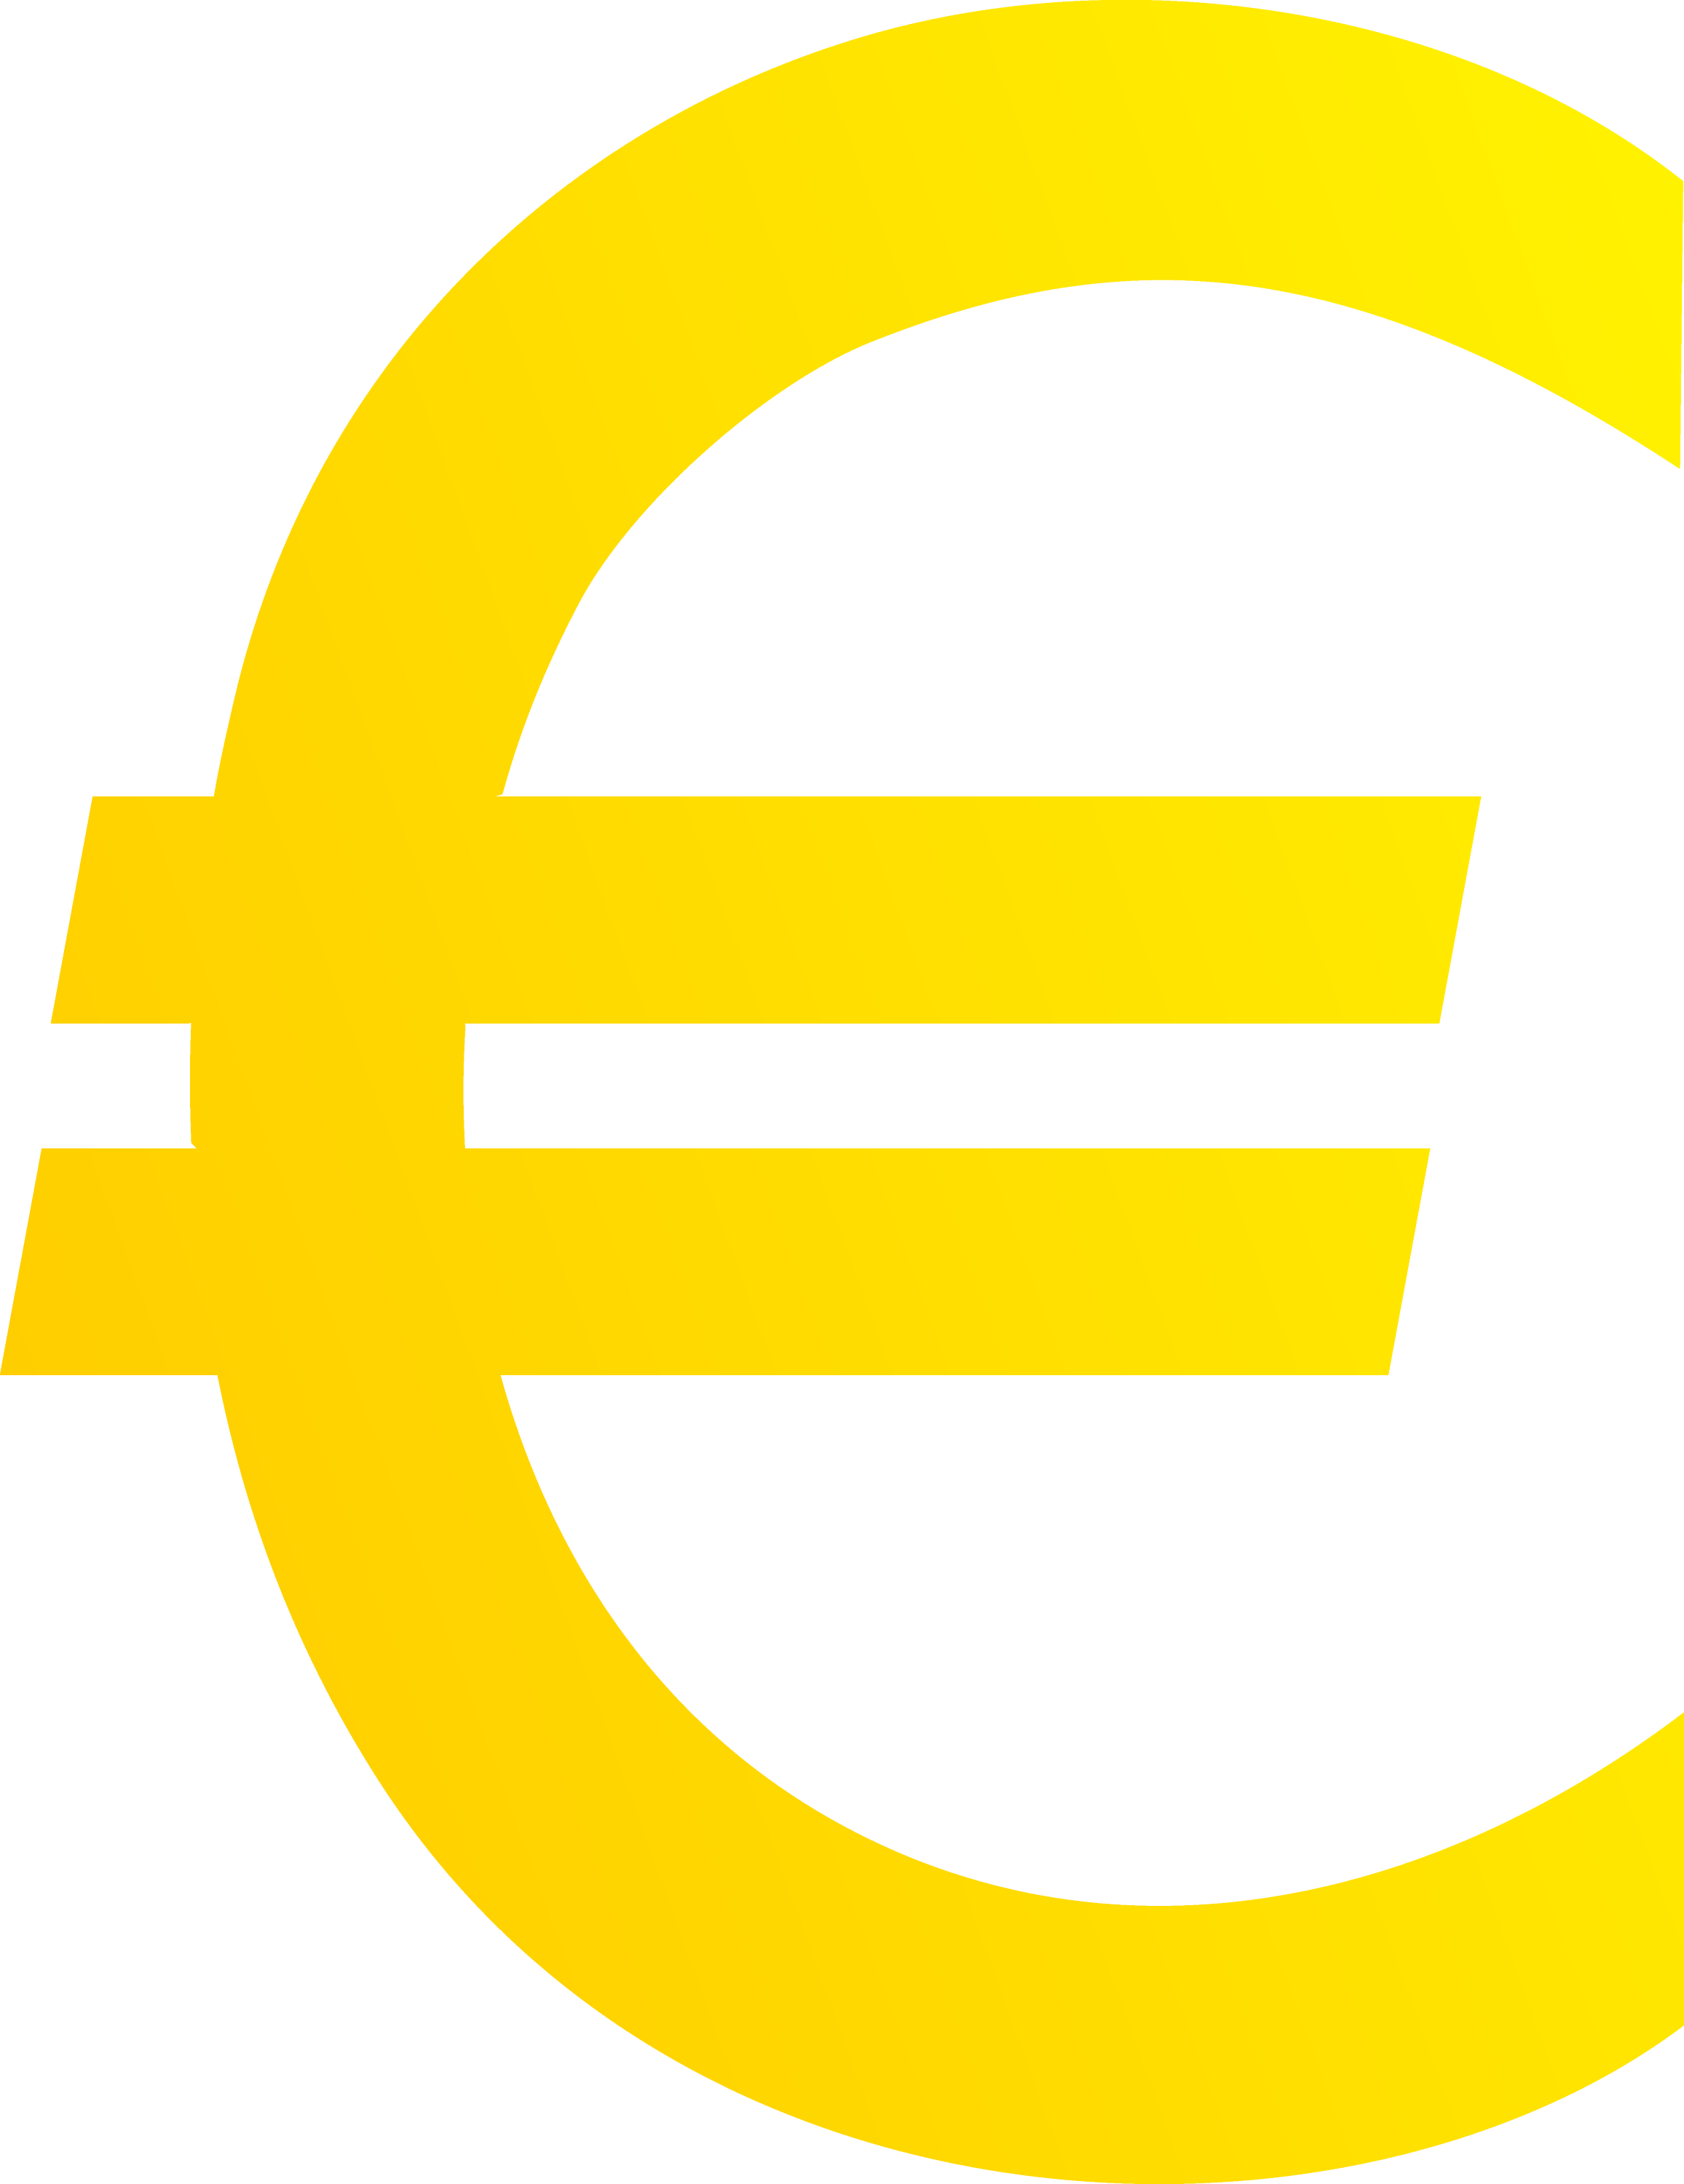 euro currency clipart - photo #16